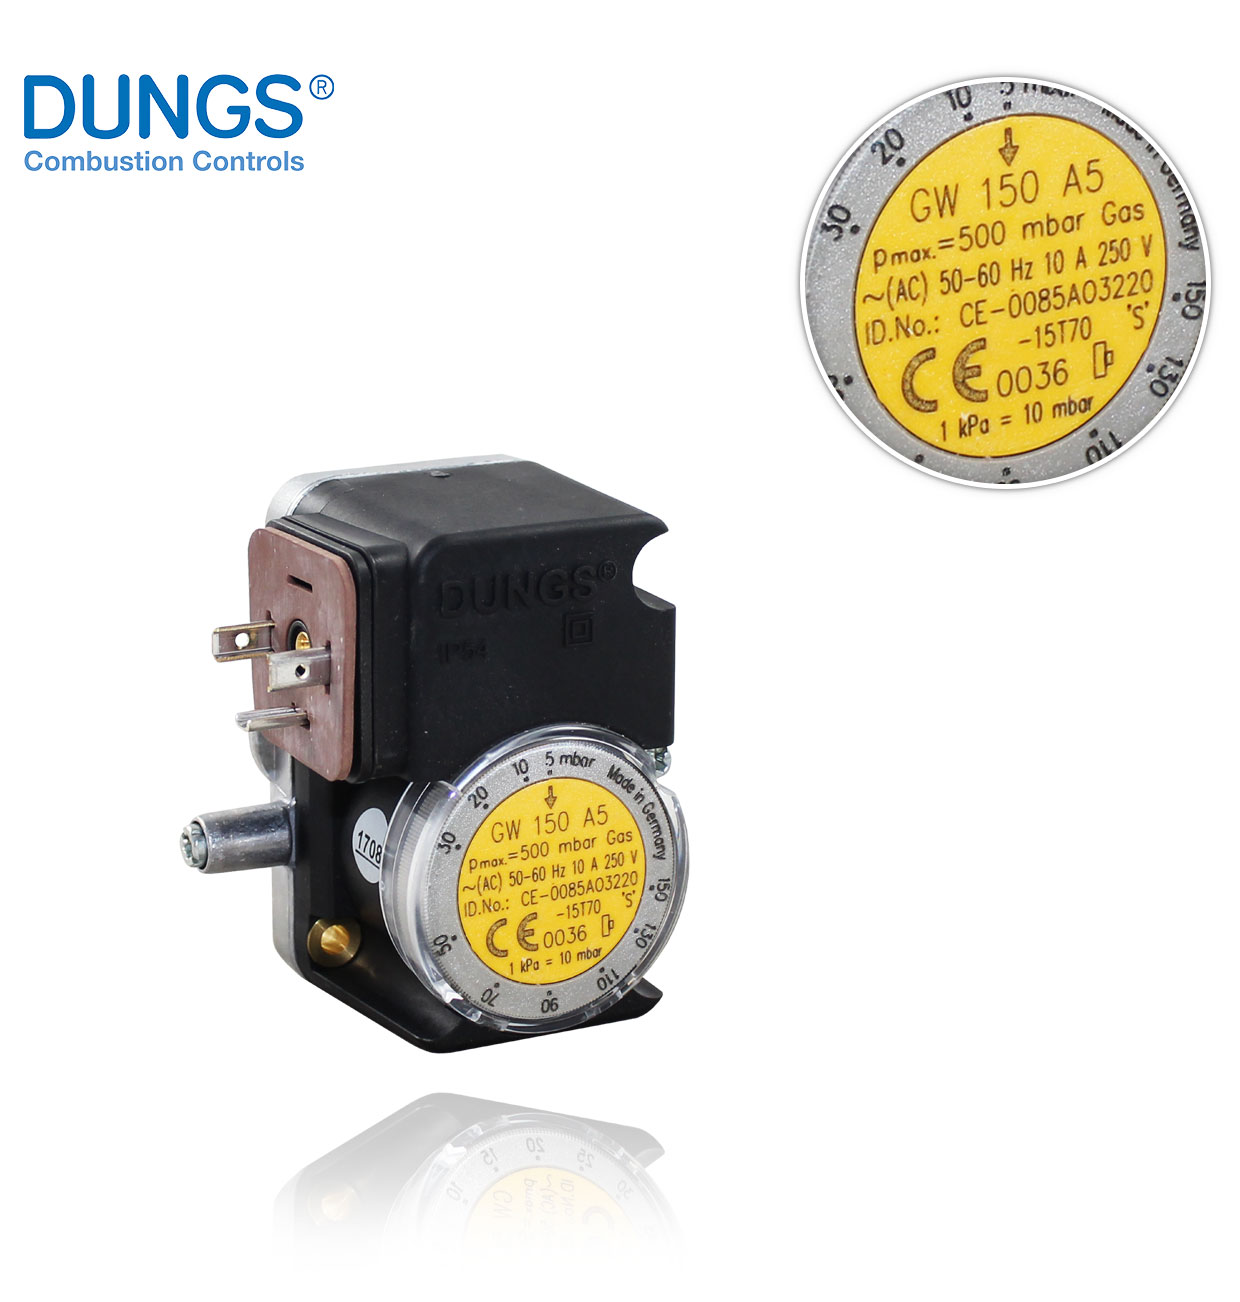 GW 150 A5 DUNGS PRESSURE SWITCH